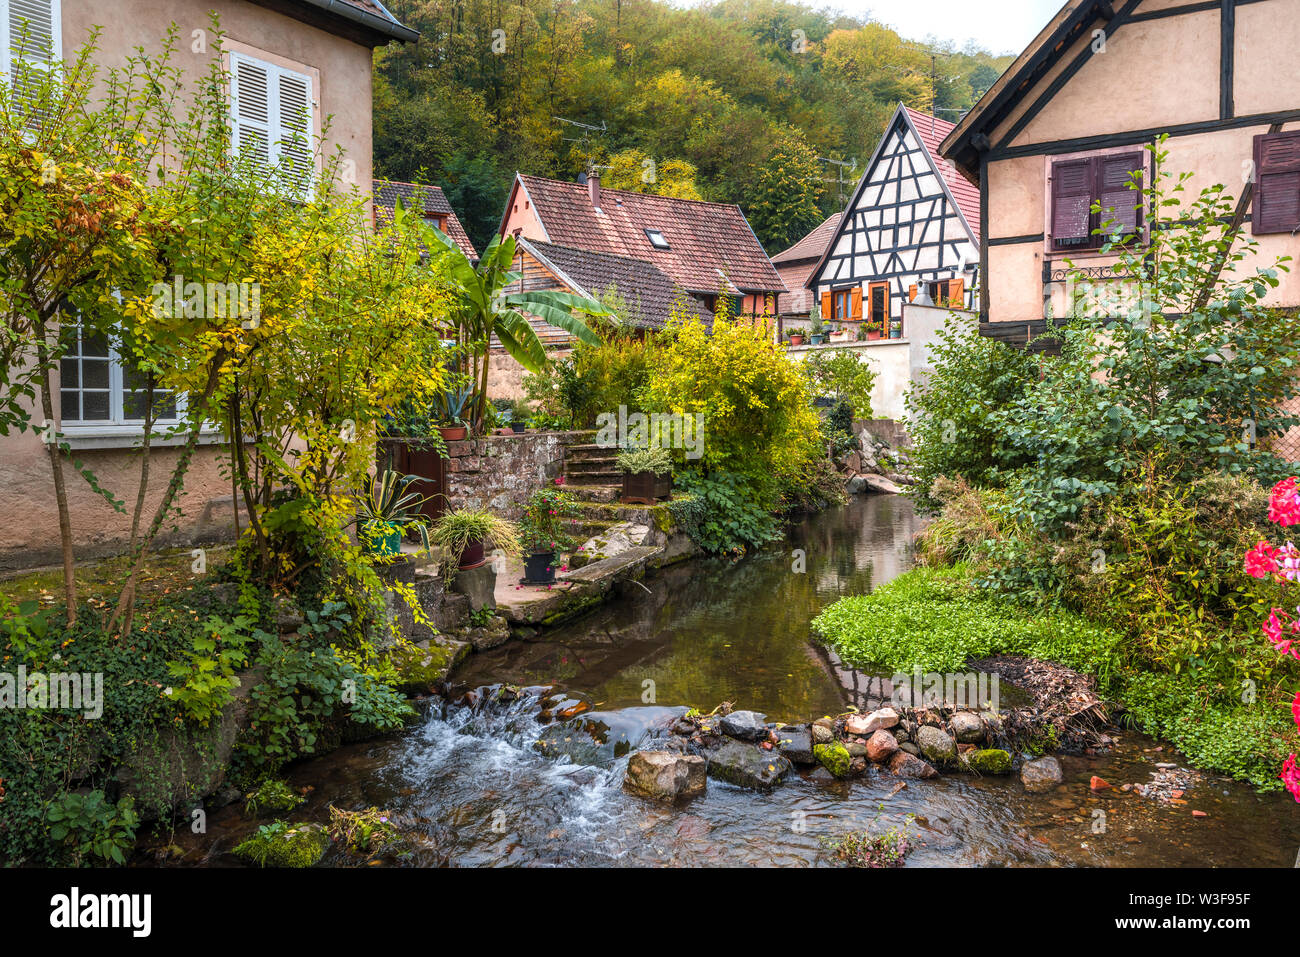 village Andlau, Alsace Wine Route, France, natural brook between timbered houses Stock Photo